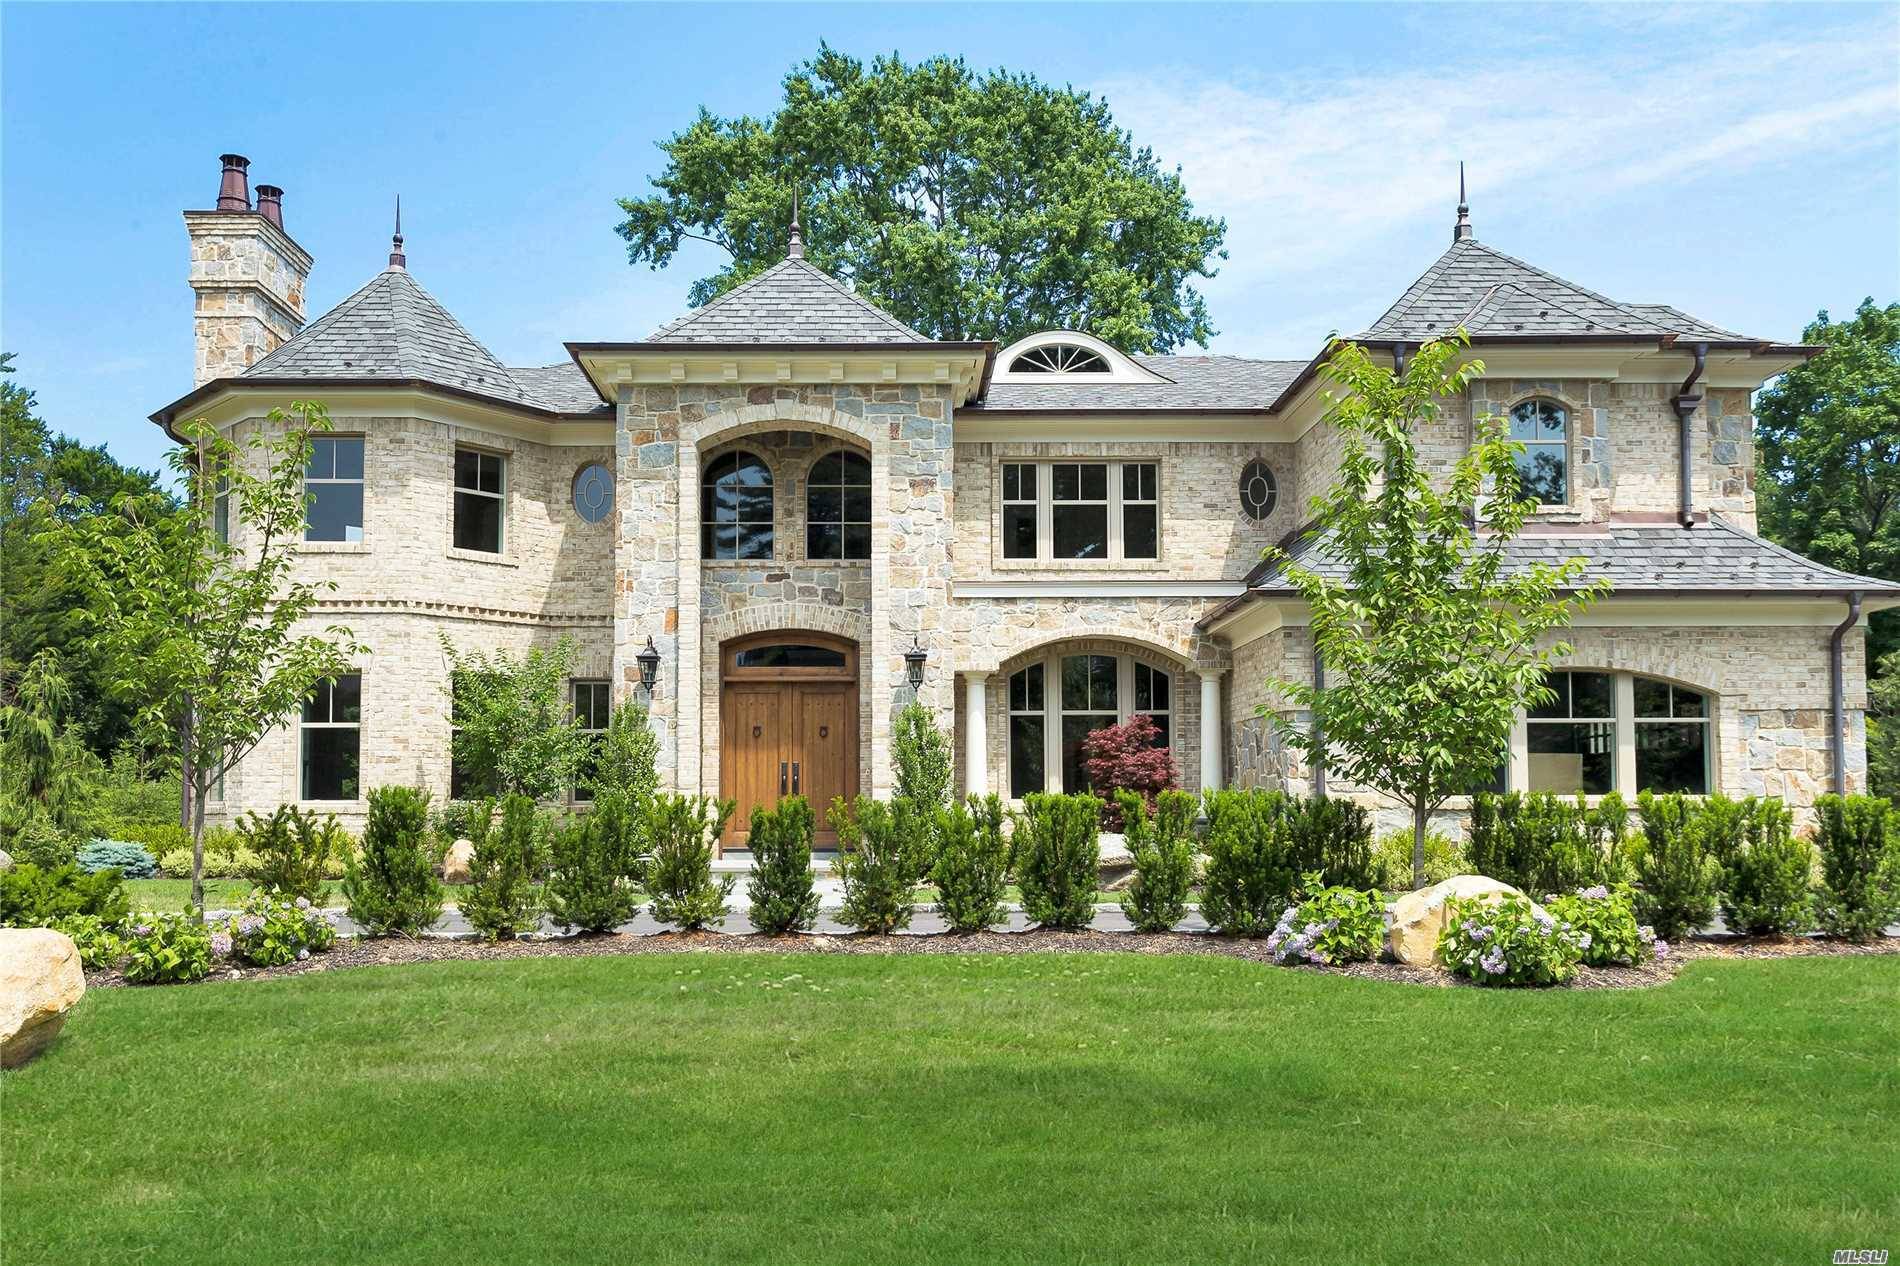 Roslyn Heights. Extraordinary Brick And Stone New Construction Colonial In Roslyn Heights Country Club, Built By Renowned Developers.